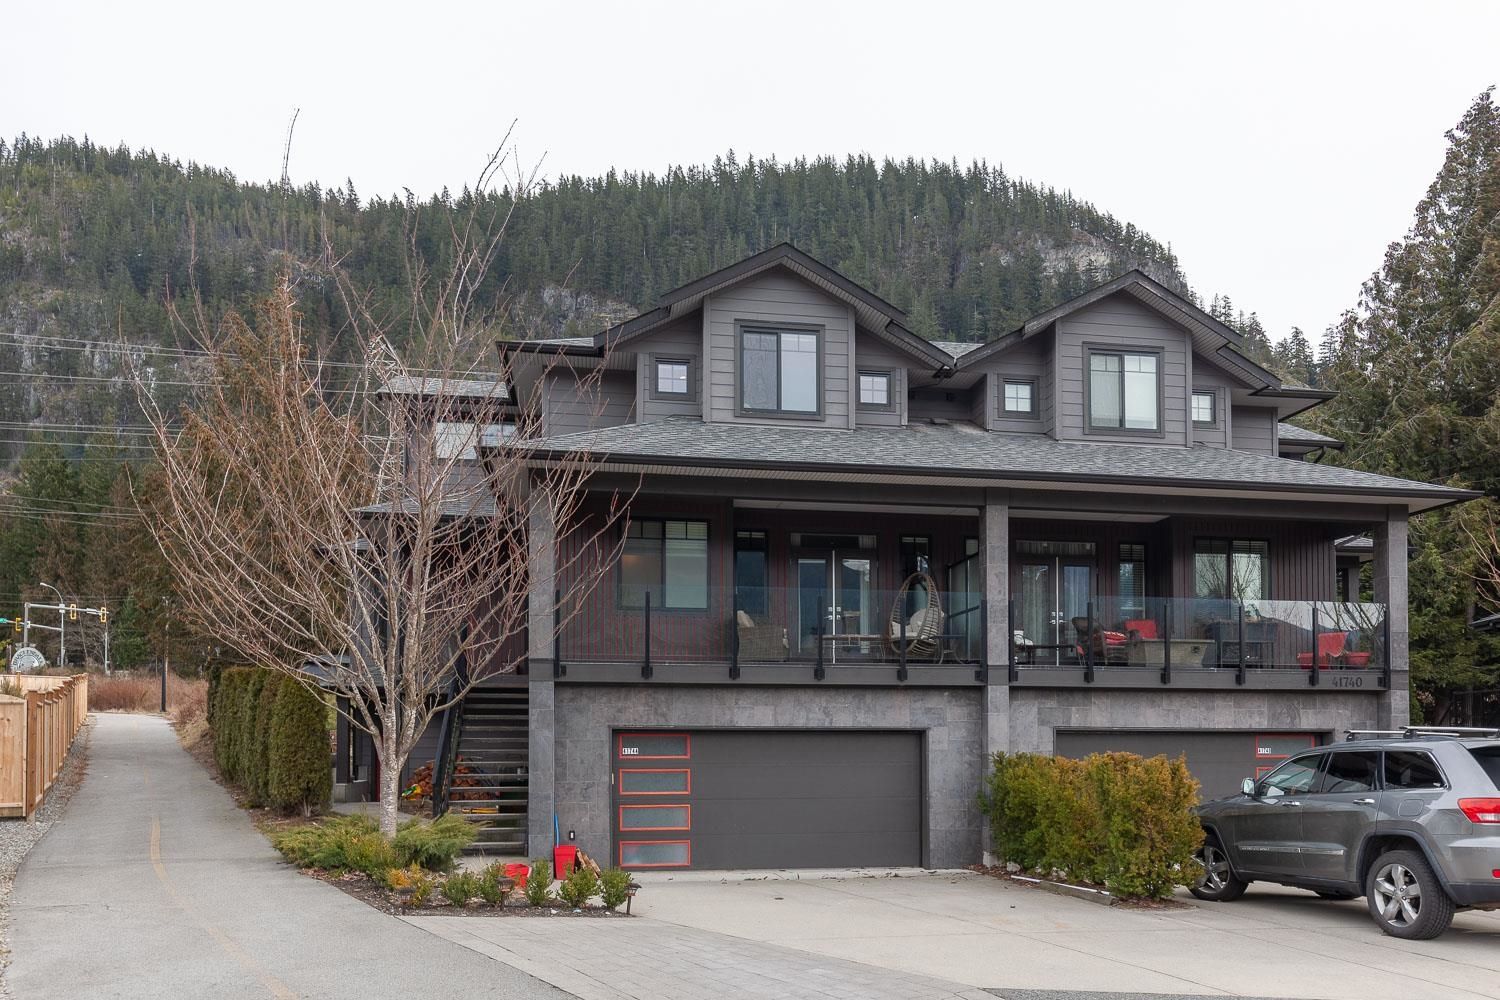 New property listed in Brackendale, Squamish